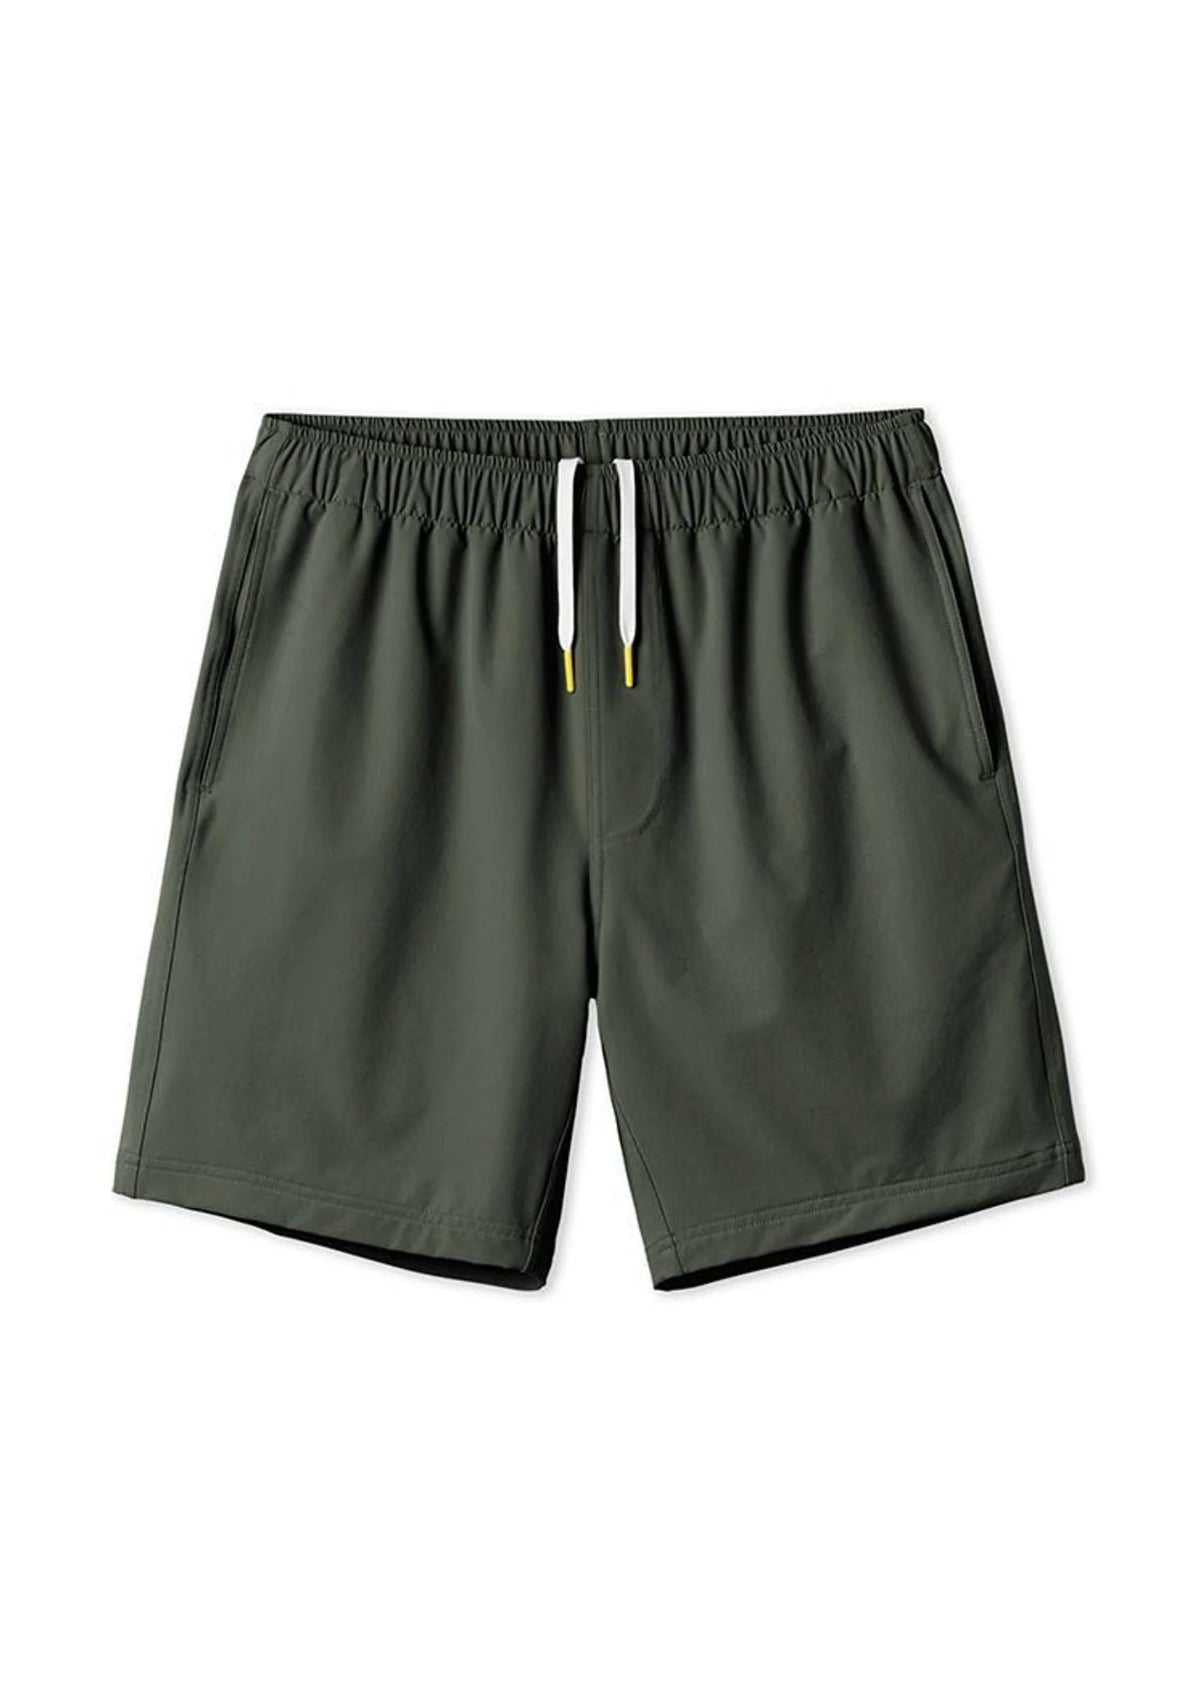 All Over Shorts Lined - Army Green